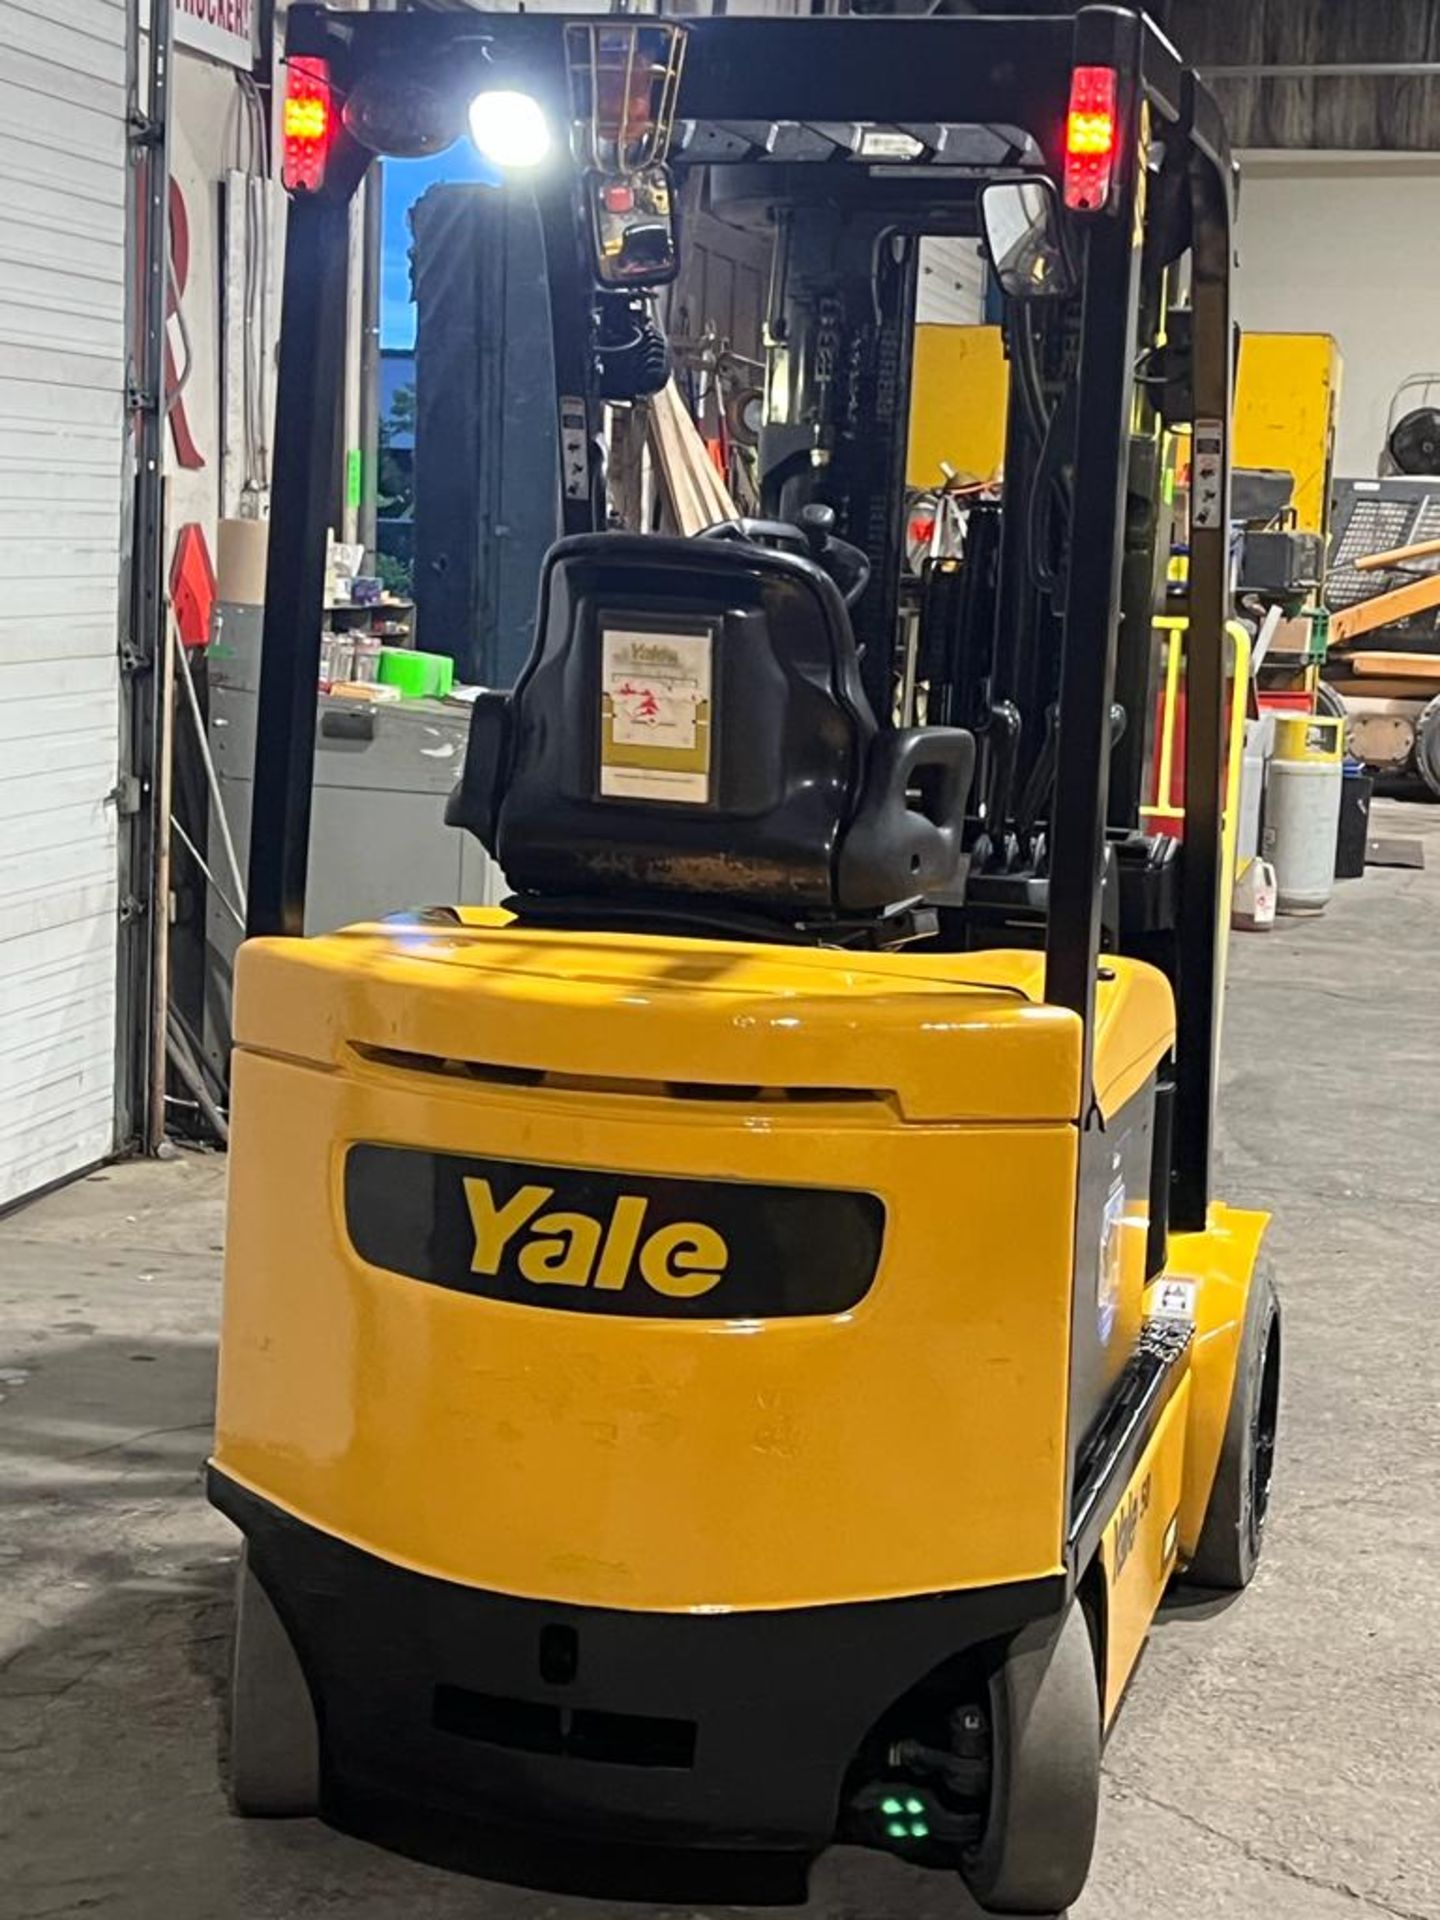 2016 Yale 5,000lbs Capacity EXPLOSION PROOF Forklift Electric 48V with Sideshift and 3-stage Mast - Image 4 of 4